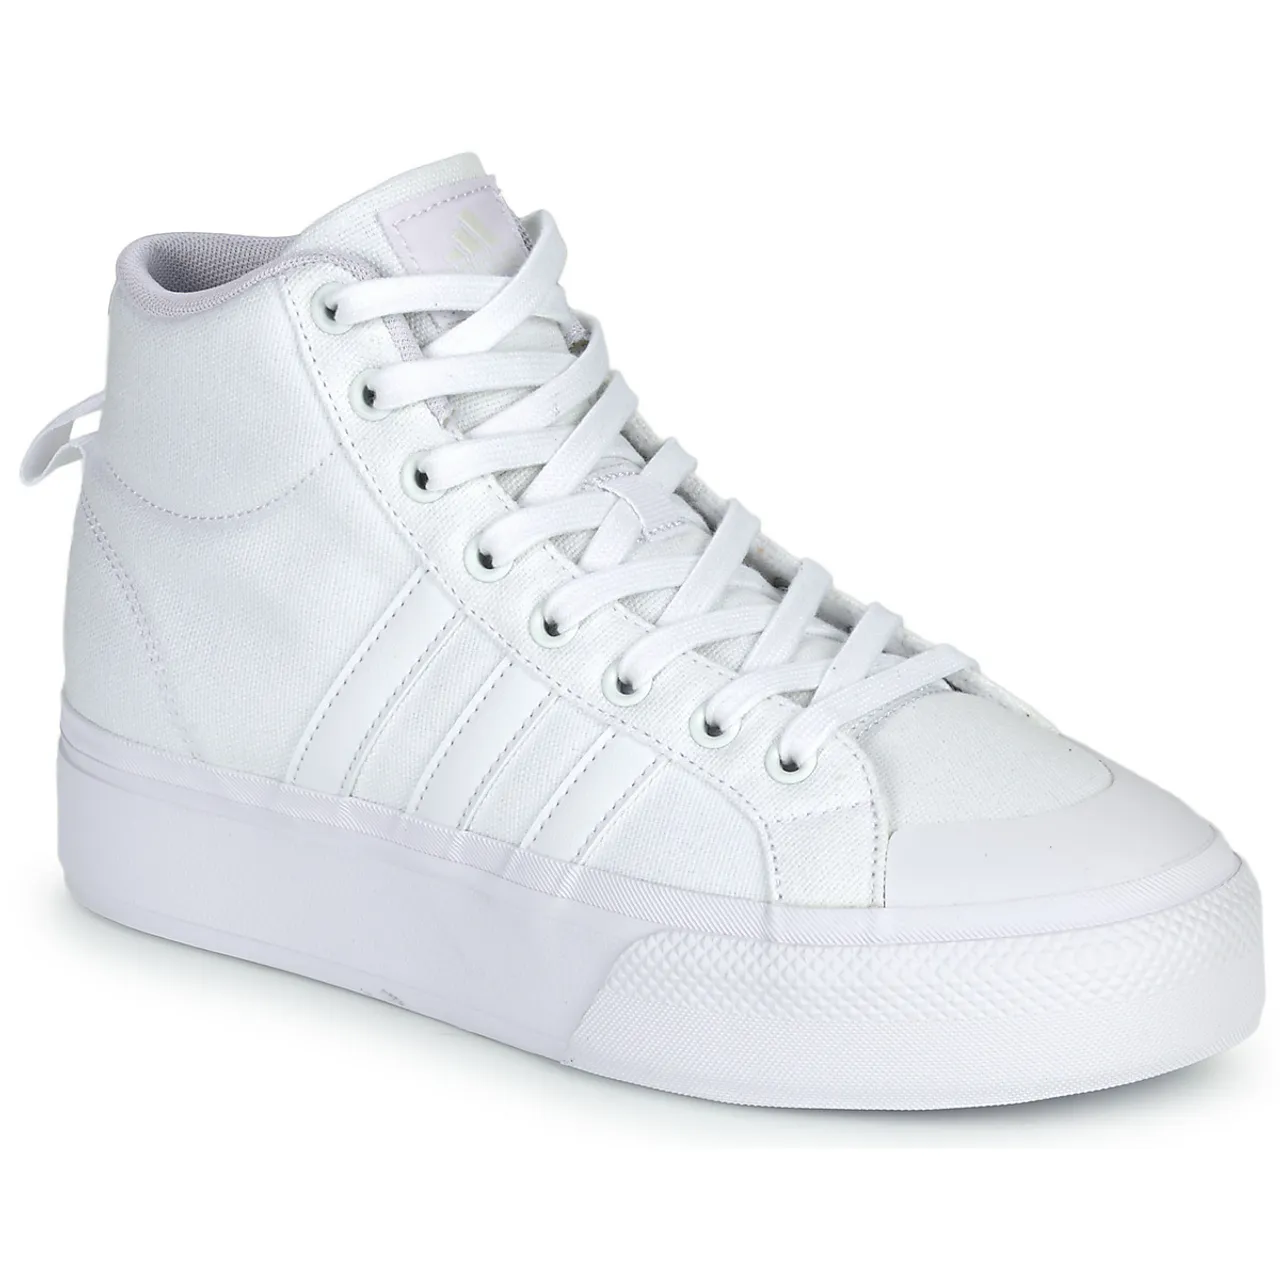 adidas  BRAVADA 2.0 MID PLATFORM  women's Shoes (High-top Trainers) in White